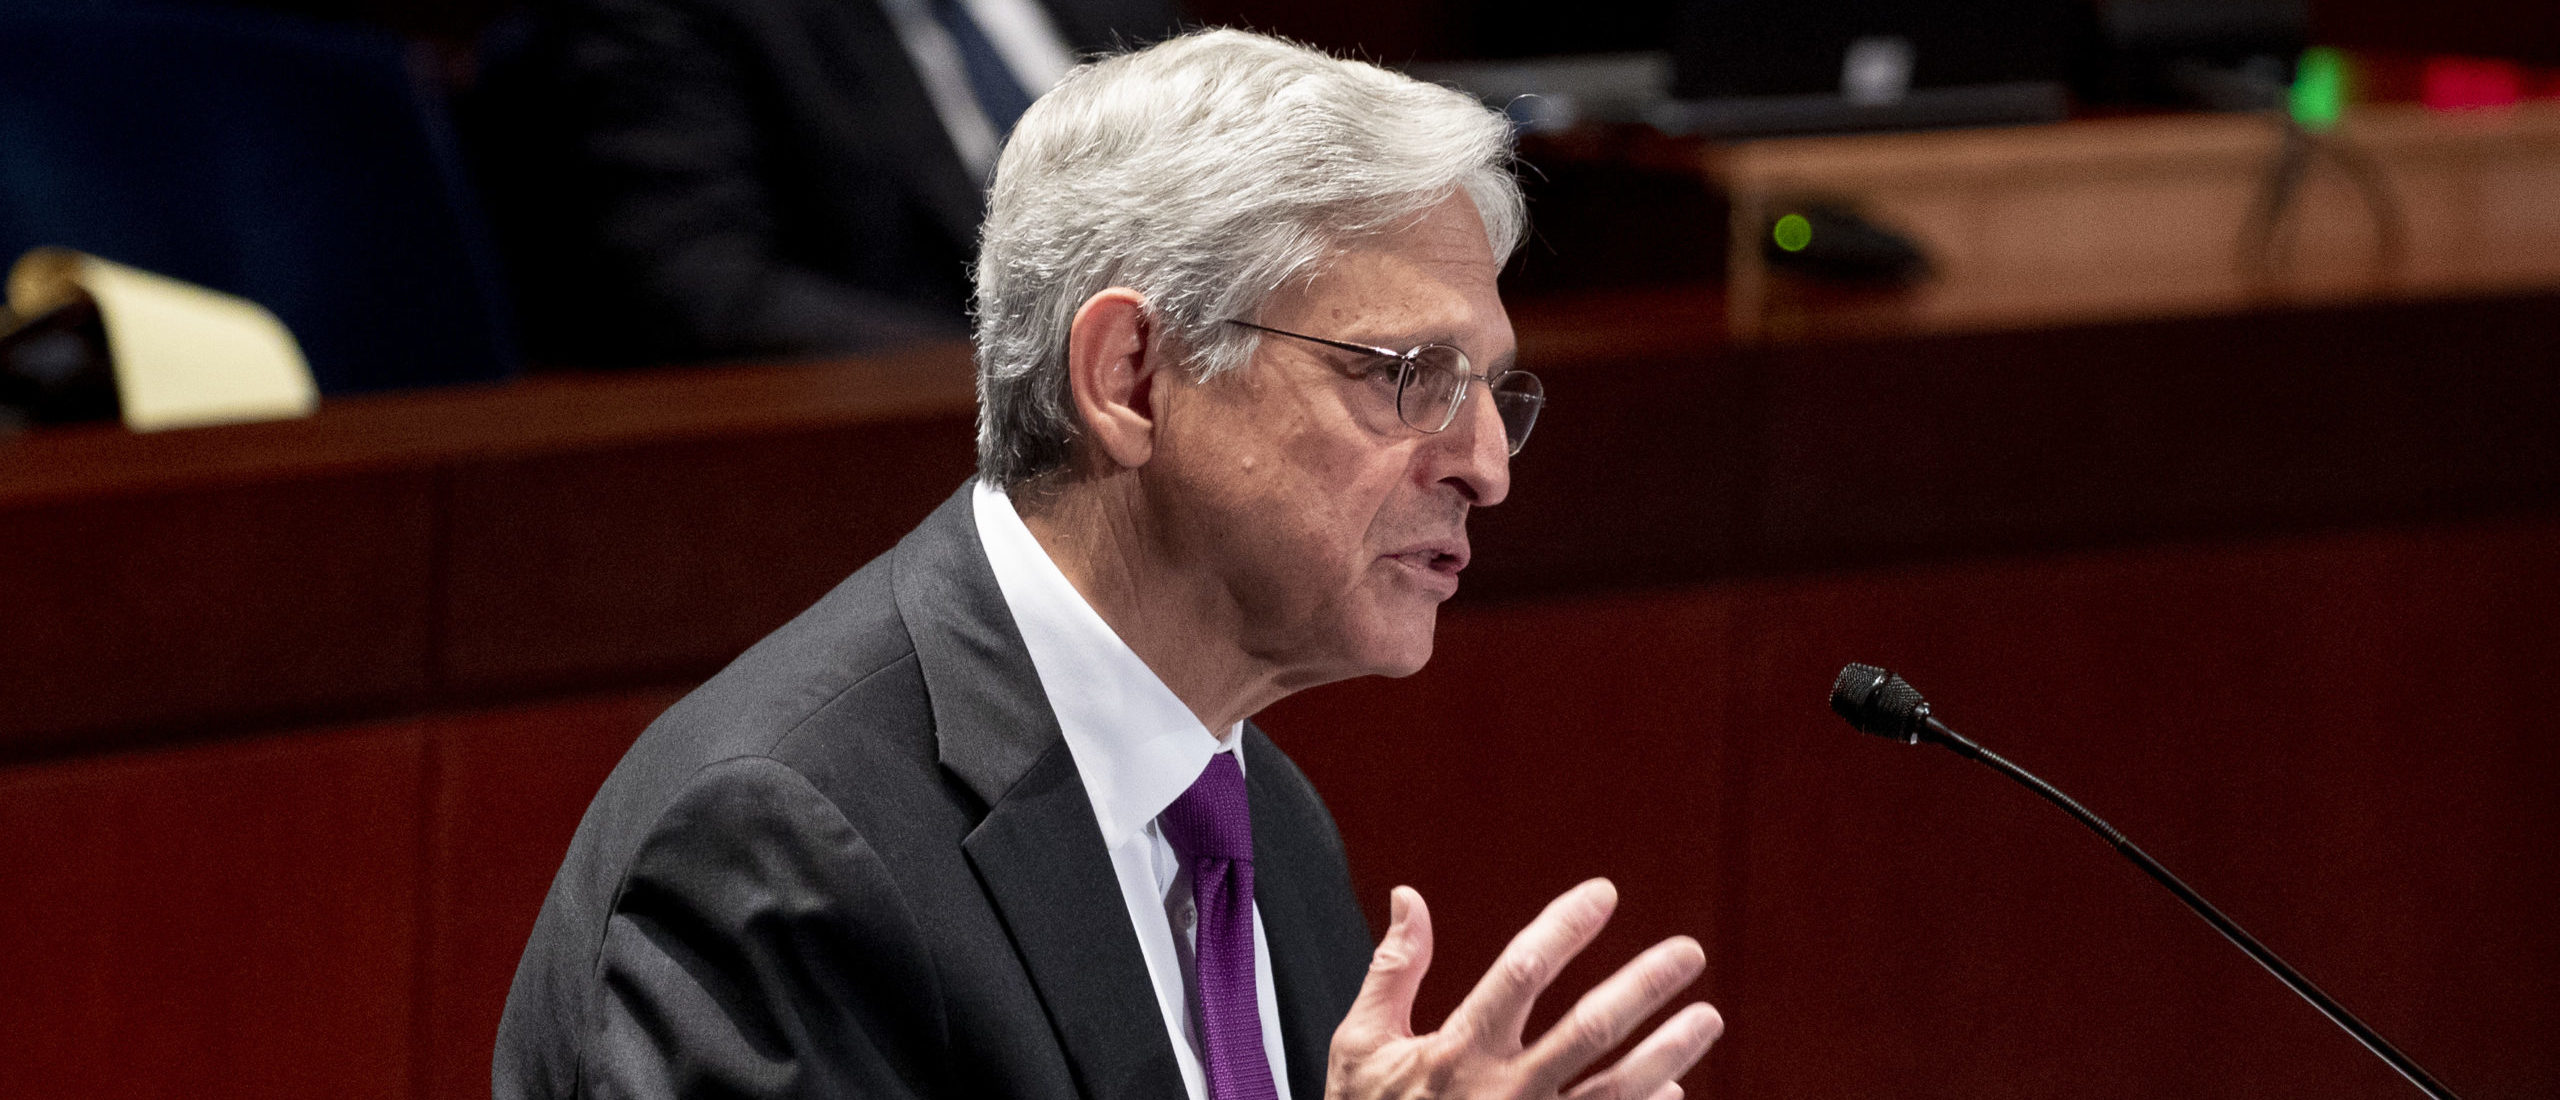 Attorney General Merrick Garland testifies before the House Judiciary Committee during an oversight hearing on the U.S. Department of Justice on Capitol Hill on October 21, 2021 in Washington, DC. (Photo by Michael Reynolds-Pool/Getty Images)